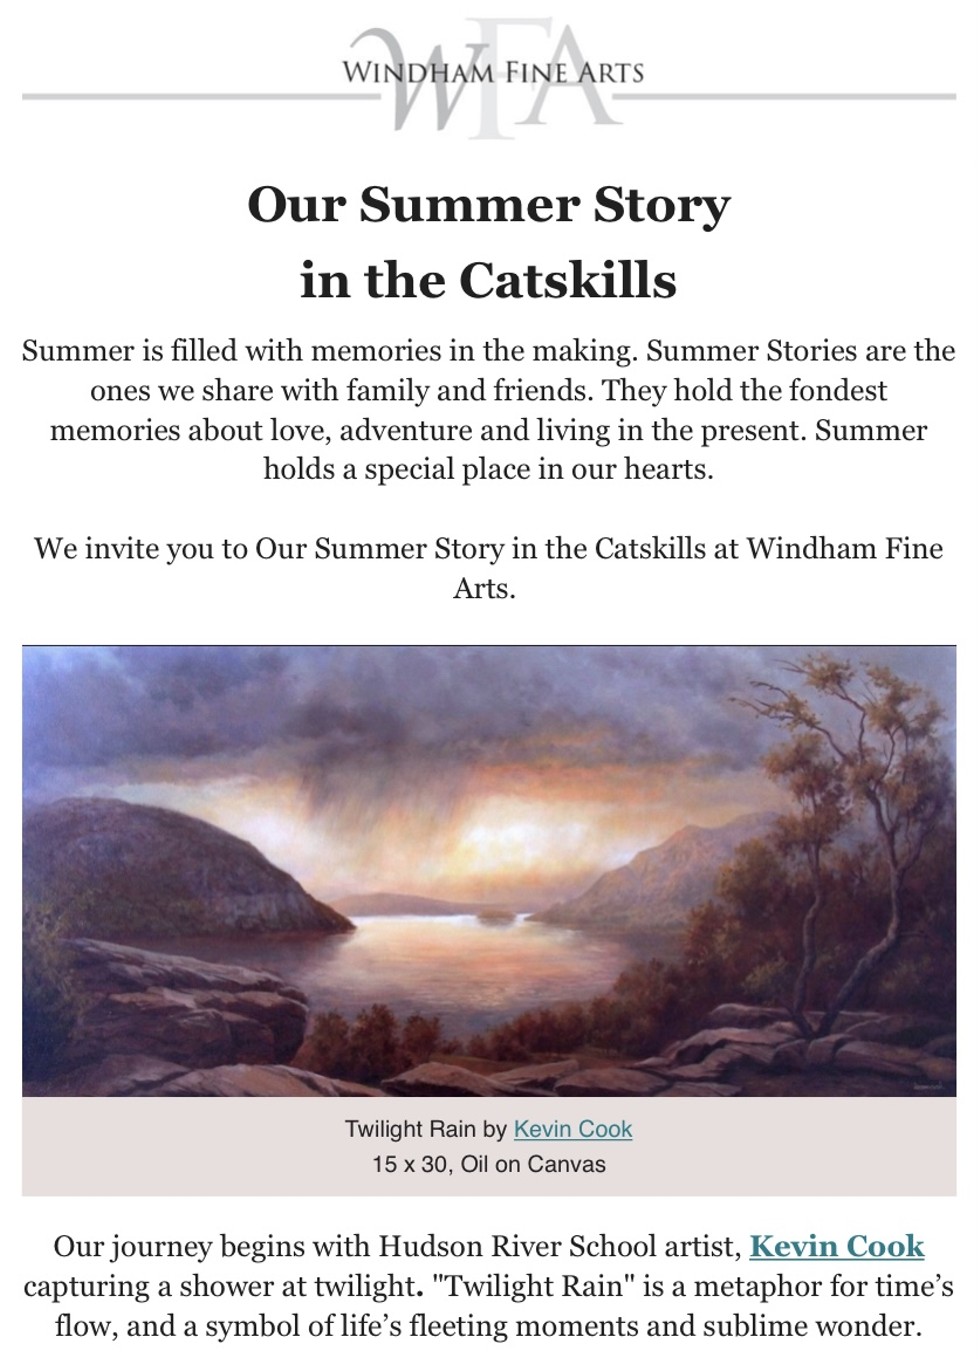 Our Summer Story in the Catskills